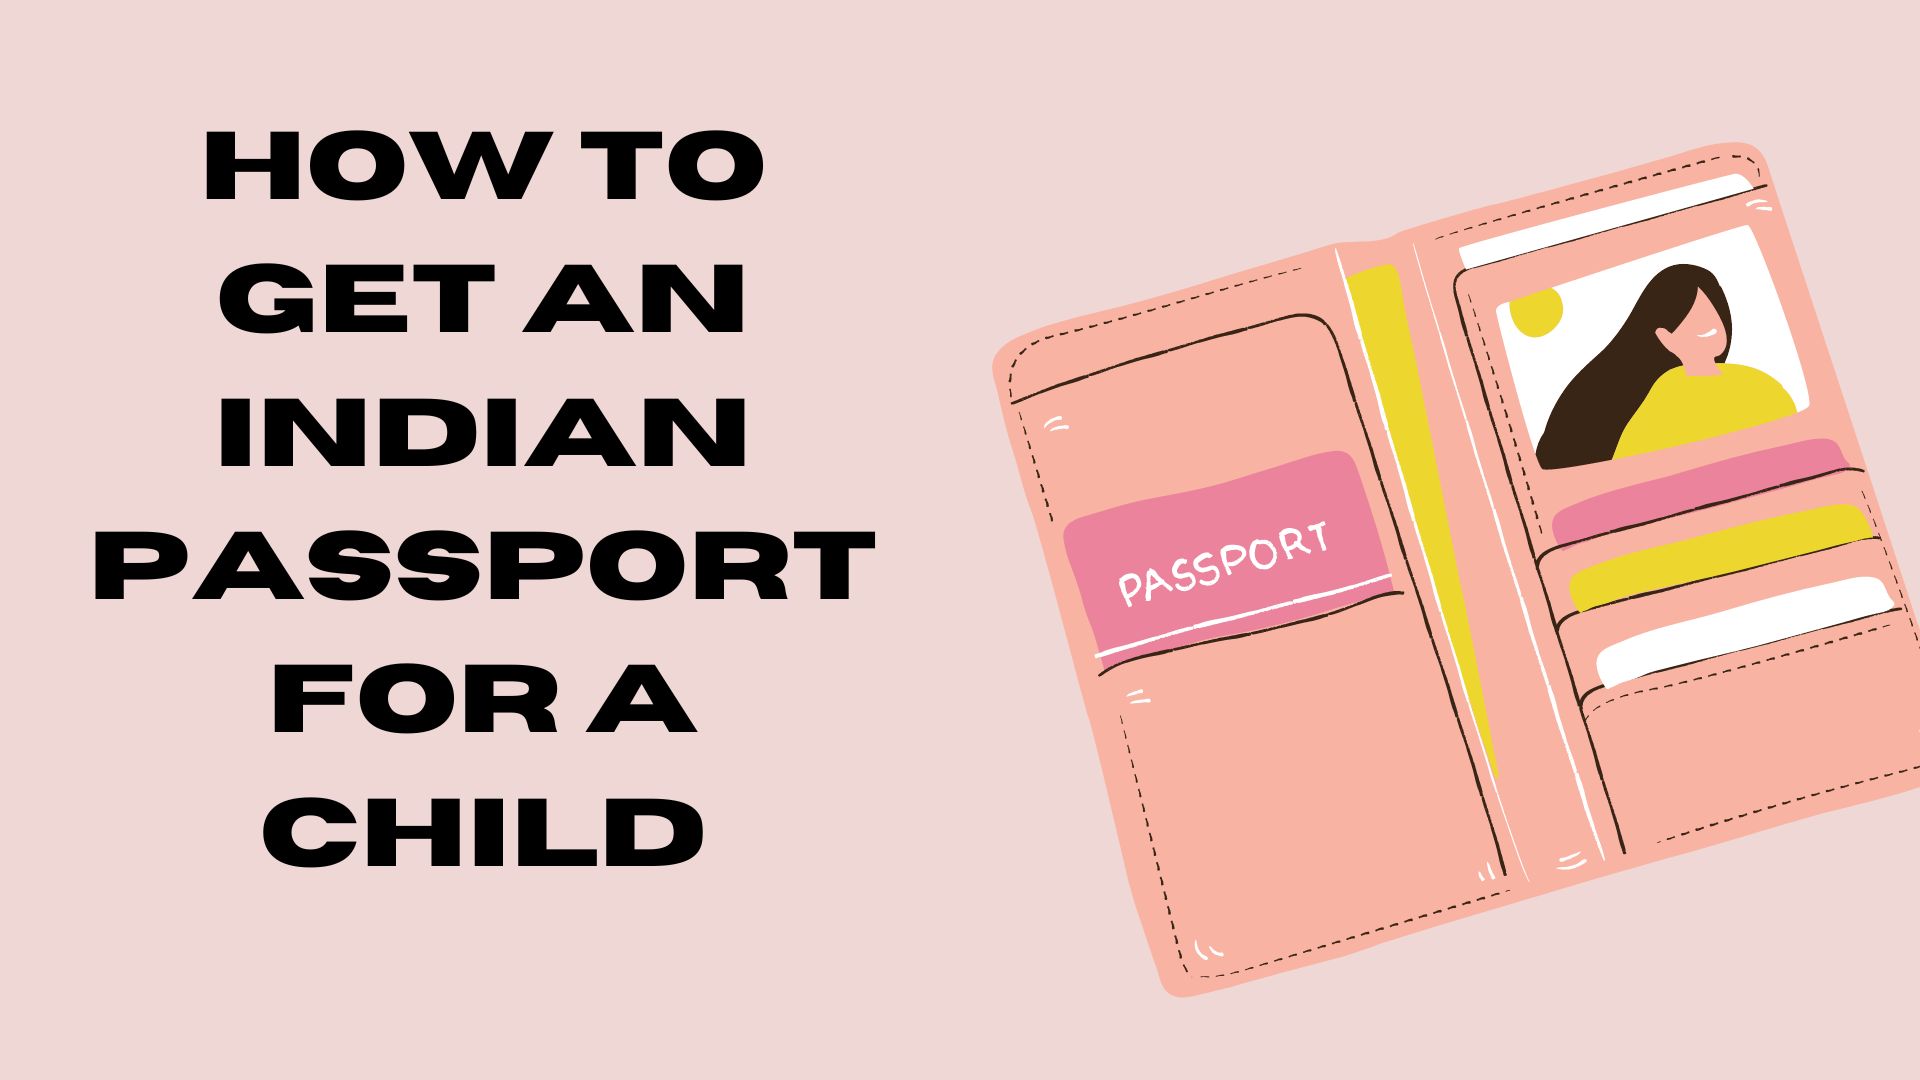 How to get an Indian passport for a child